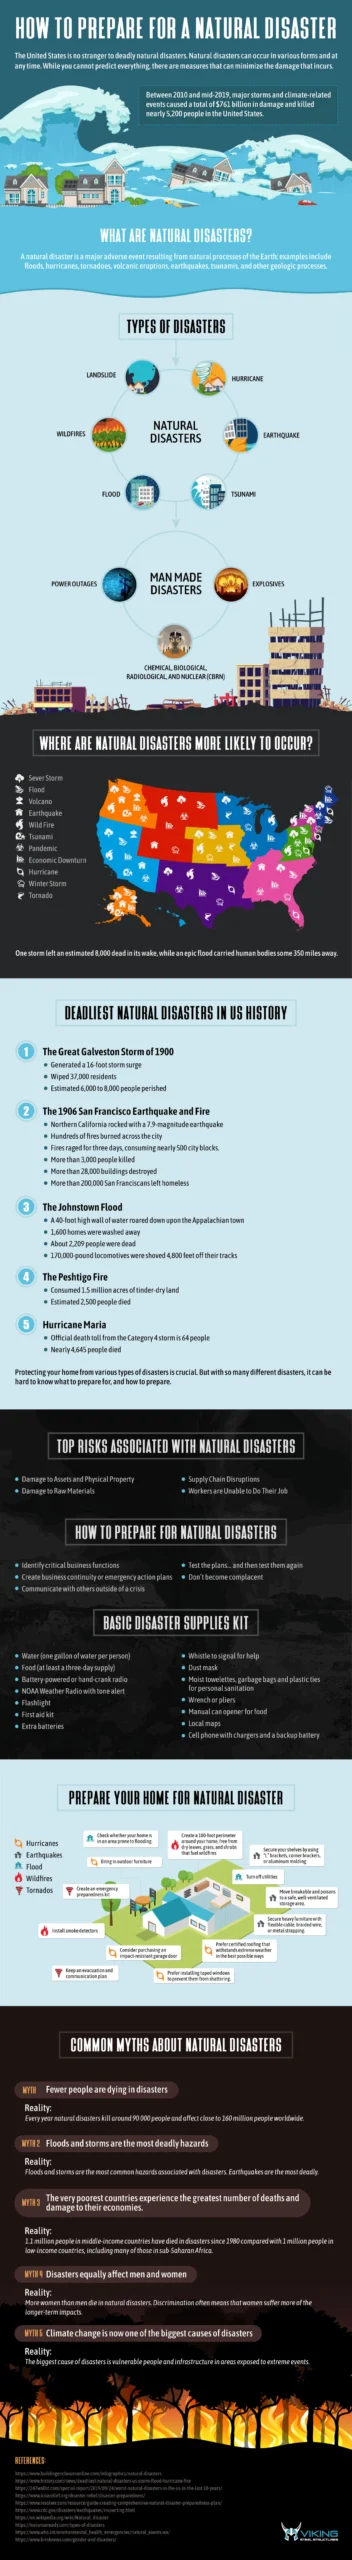 How To Prepare For A Natural Disaster [Info Graphic]
